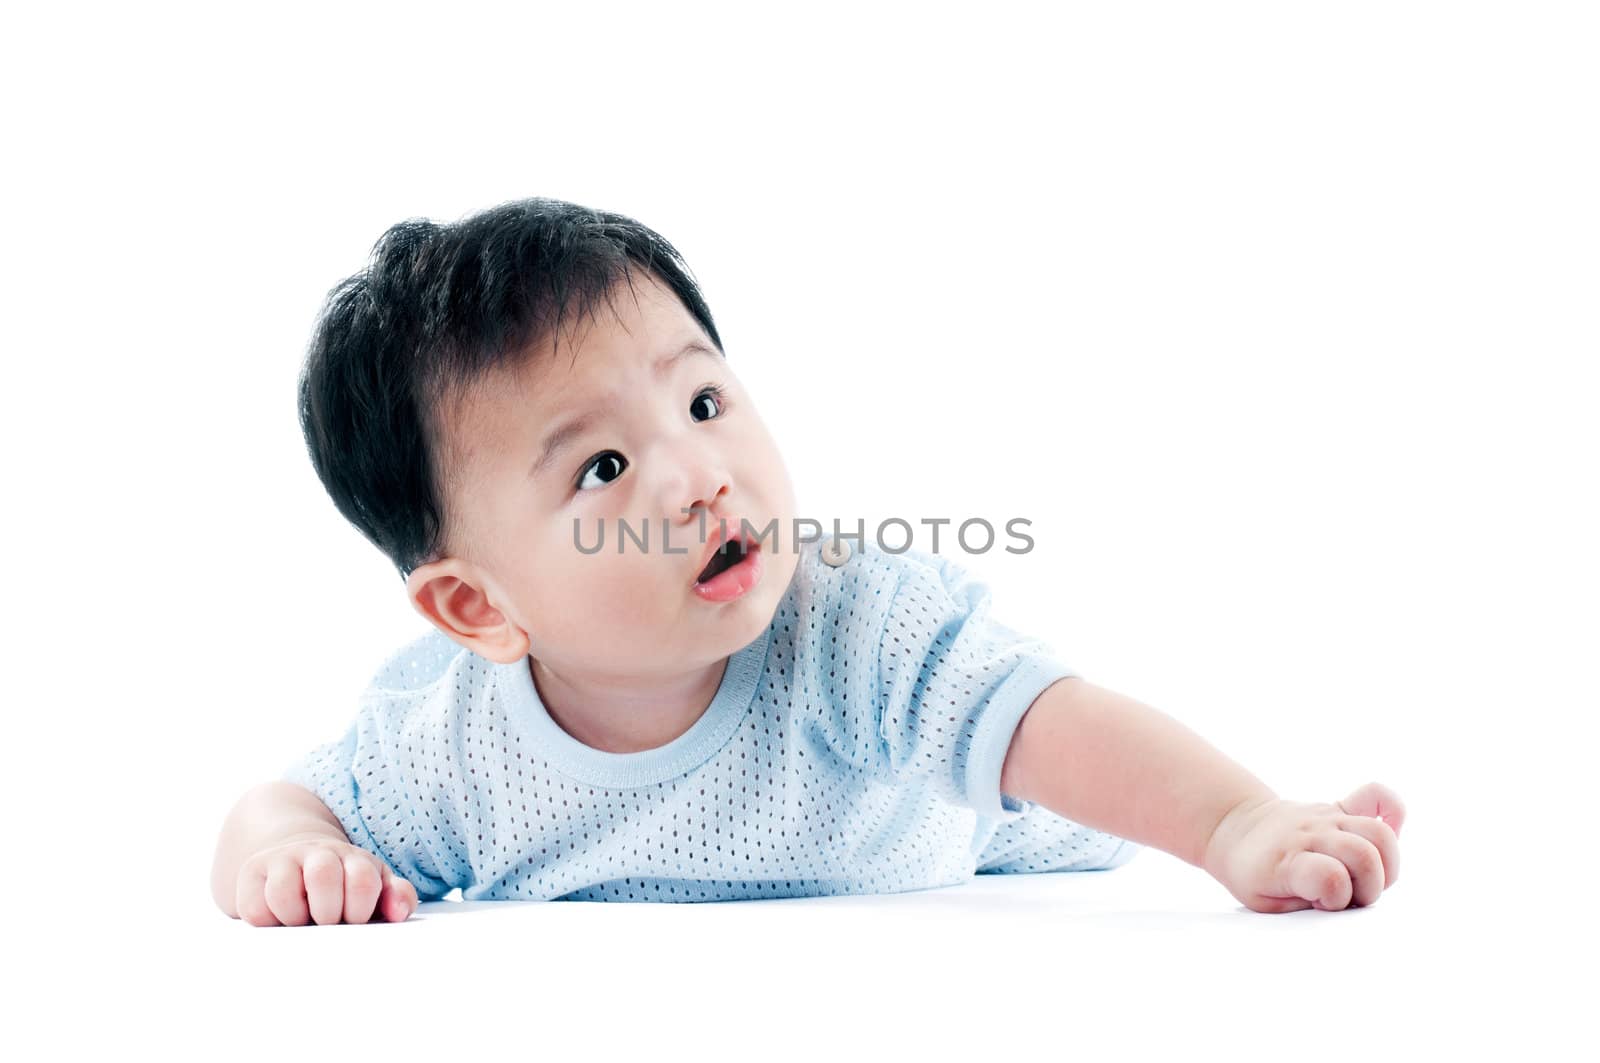 Portrait of a cute infant baby with blank expression over white background.